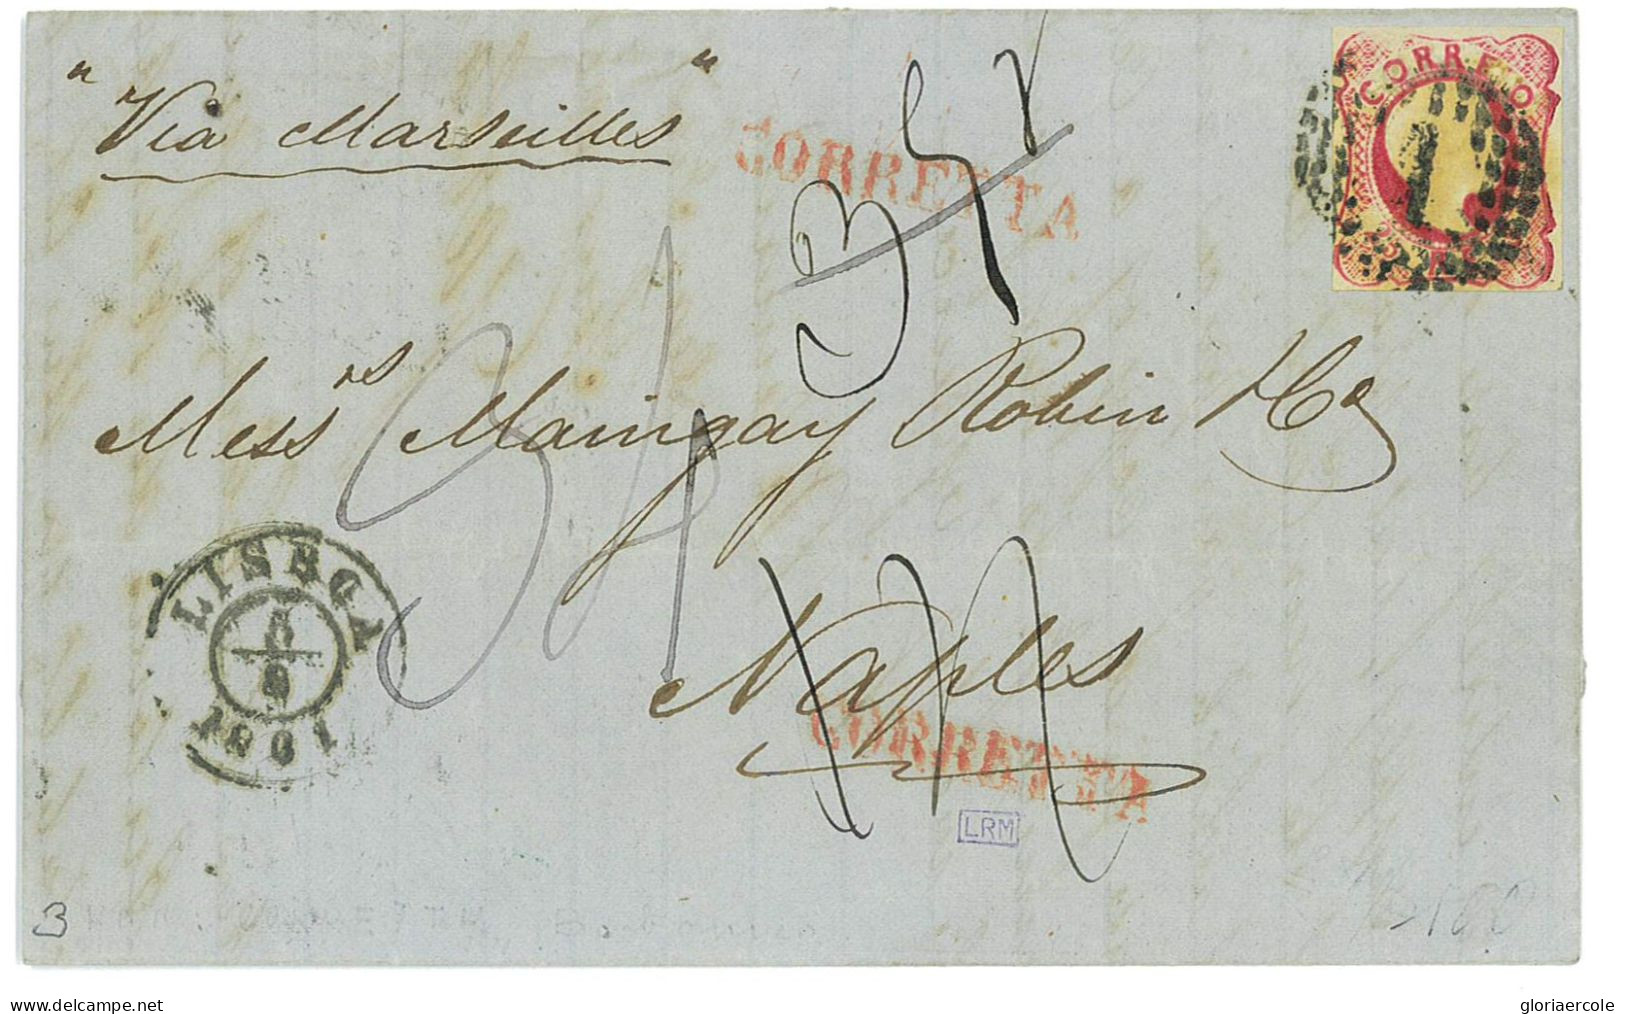 P2889 - PORTUGAL, 1861 MUNDOFIL NR. 13 ON FULL LETTER TO ITALY, 1861, VARIOUS TRANSIT AND ARRIVAL CANCELS - Storia Postale